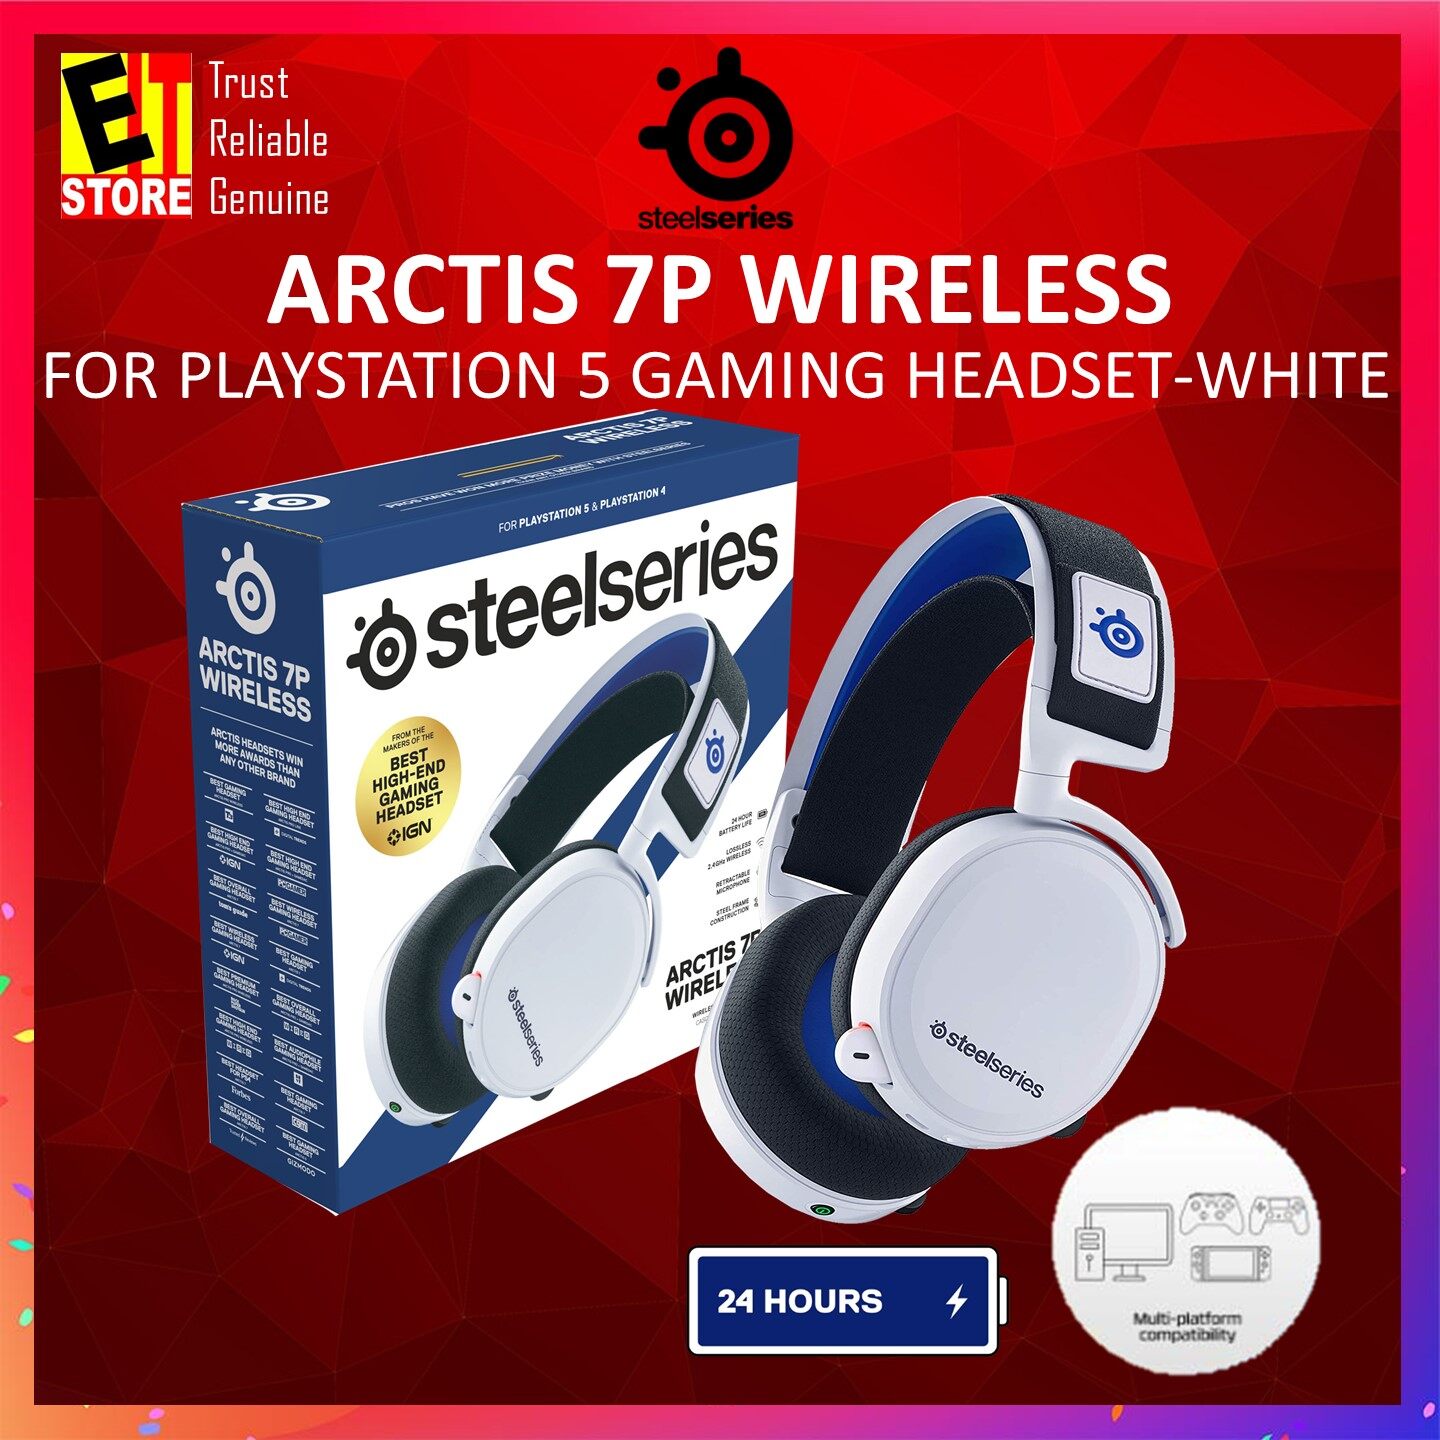 STEELSERIES ARCTIS 7P WIRELESS FOR PLAYSTATION 5 GAMING HEADSET-WHITE  (61467) | Lazada